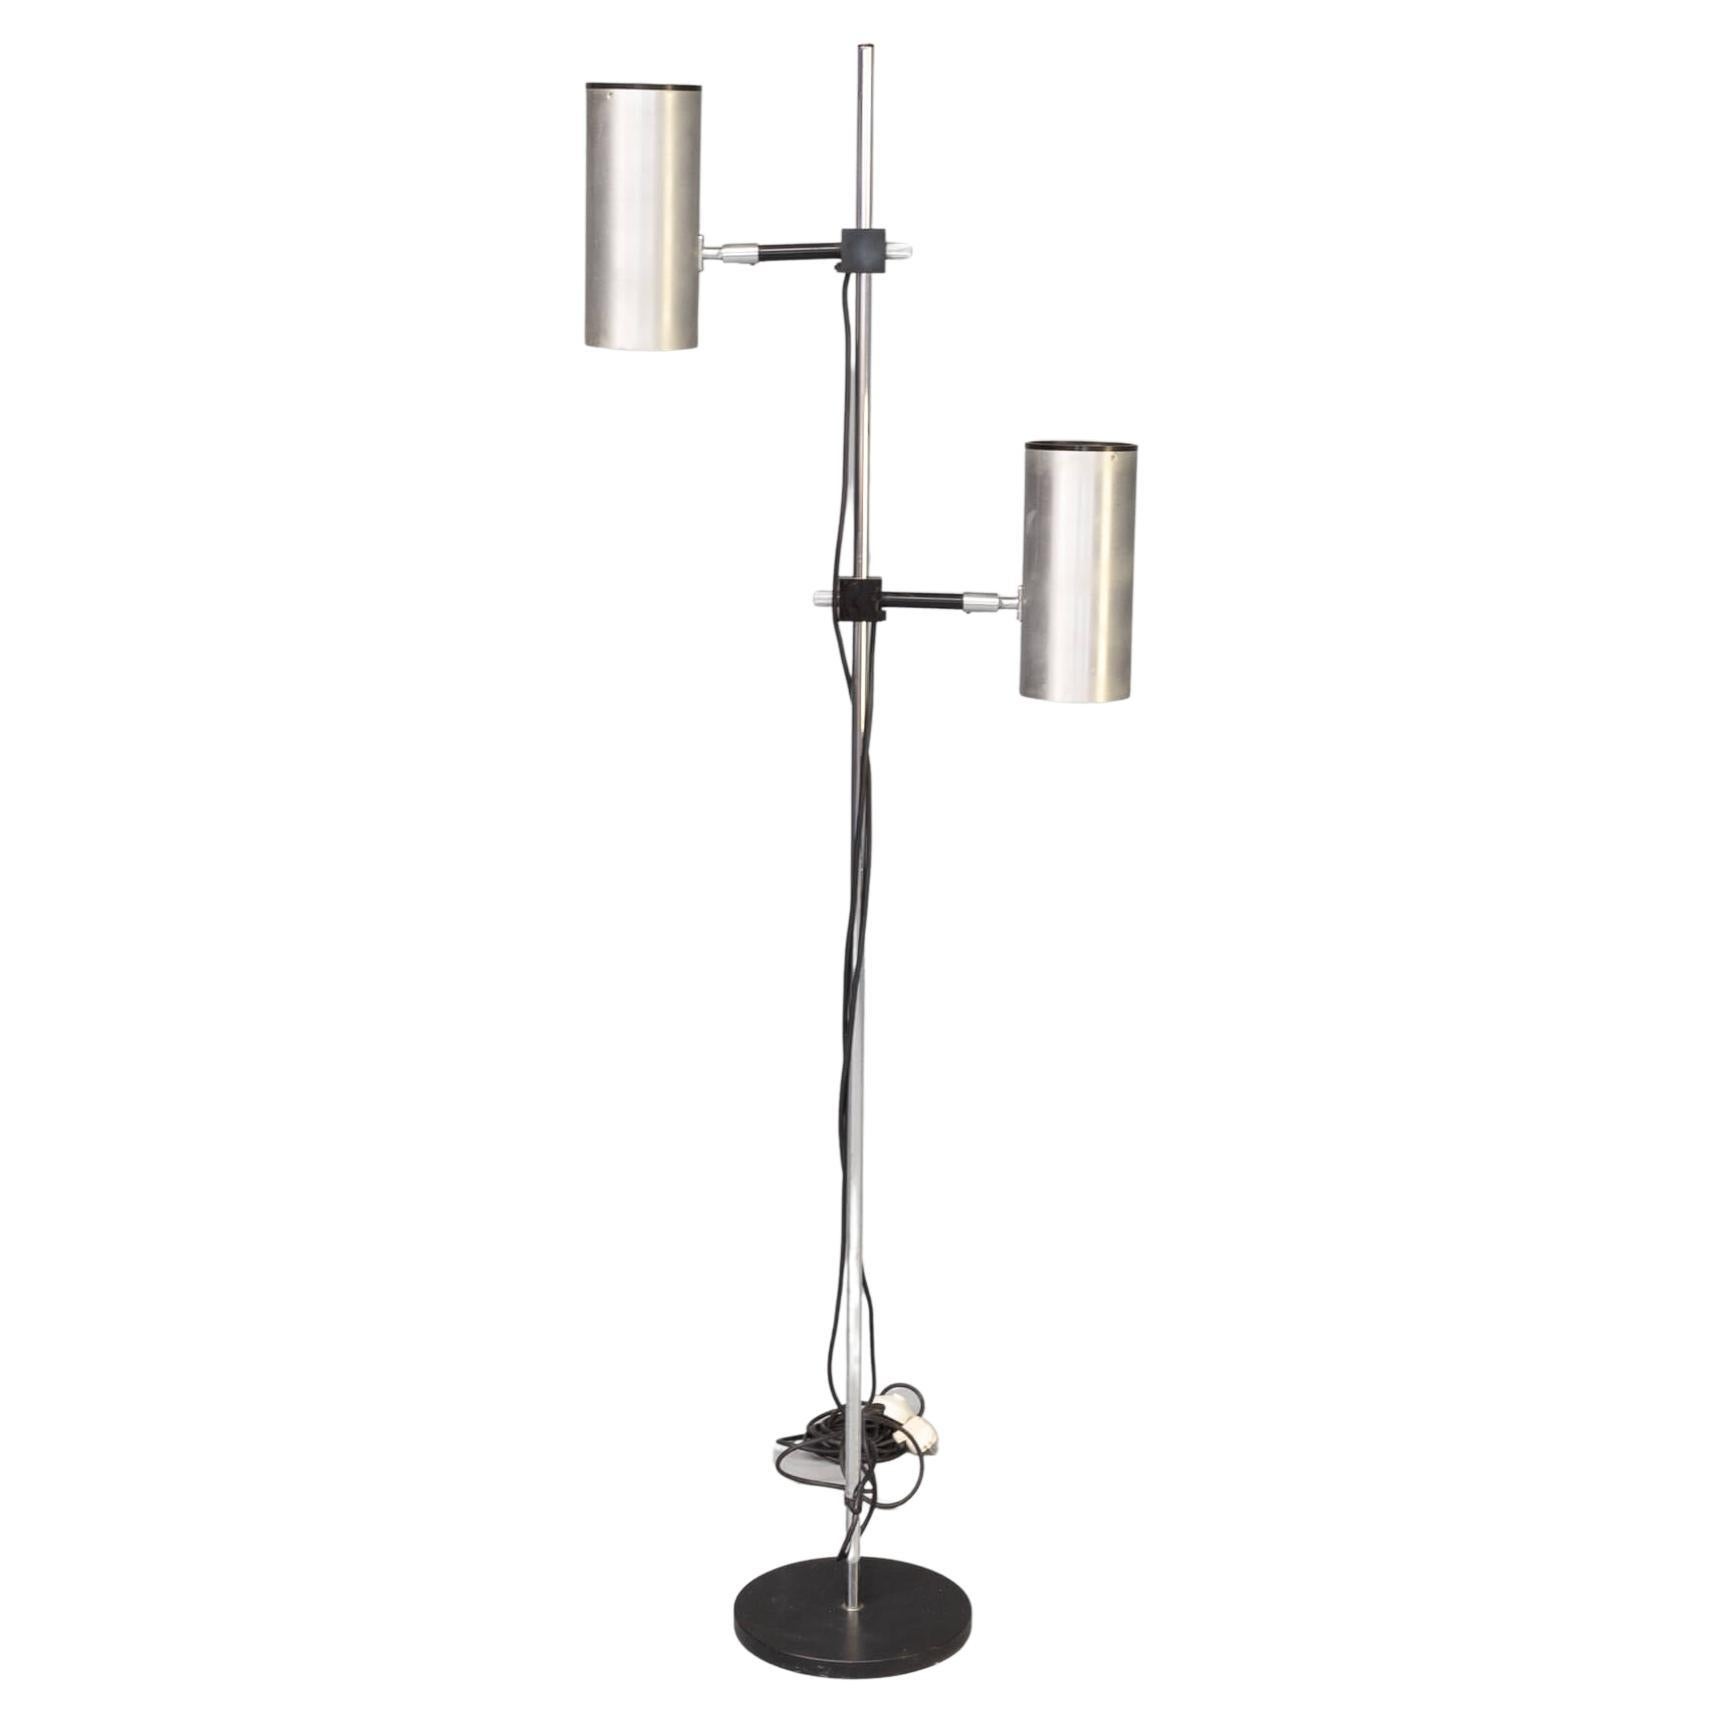 6os Maria Pergay Twin Stainless Steel Shade Floor Lamp for Uginox, Ugine Gueugn For Sale